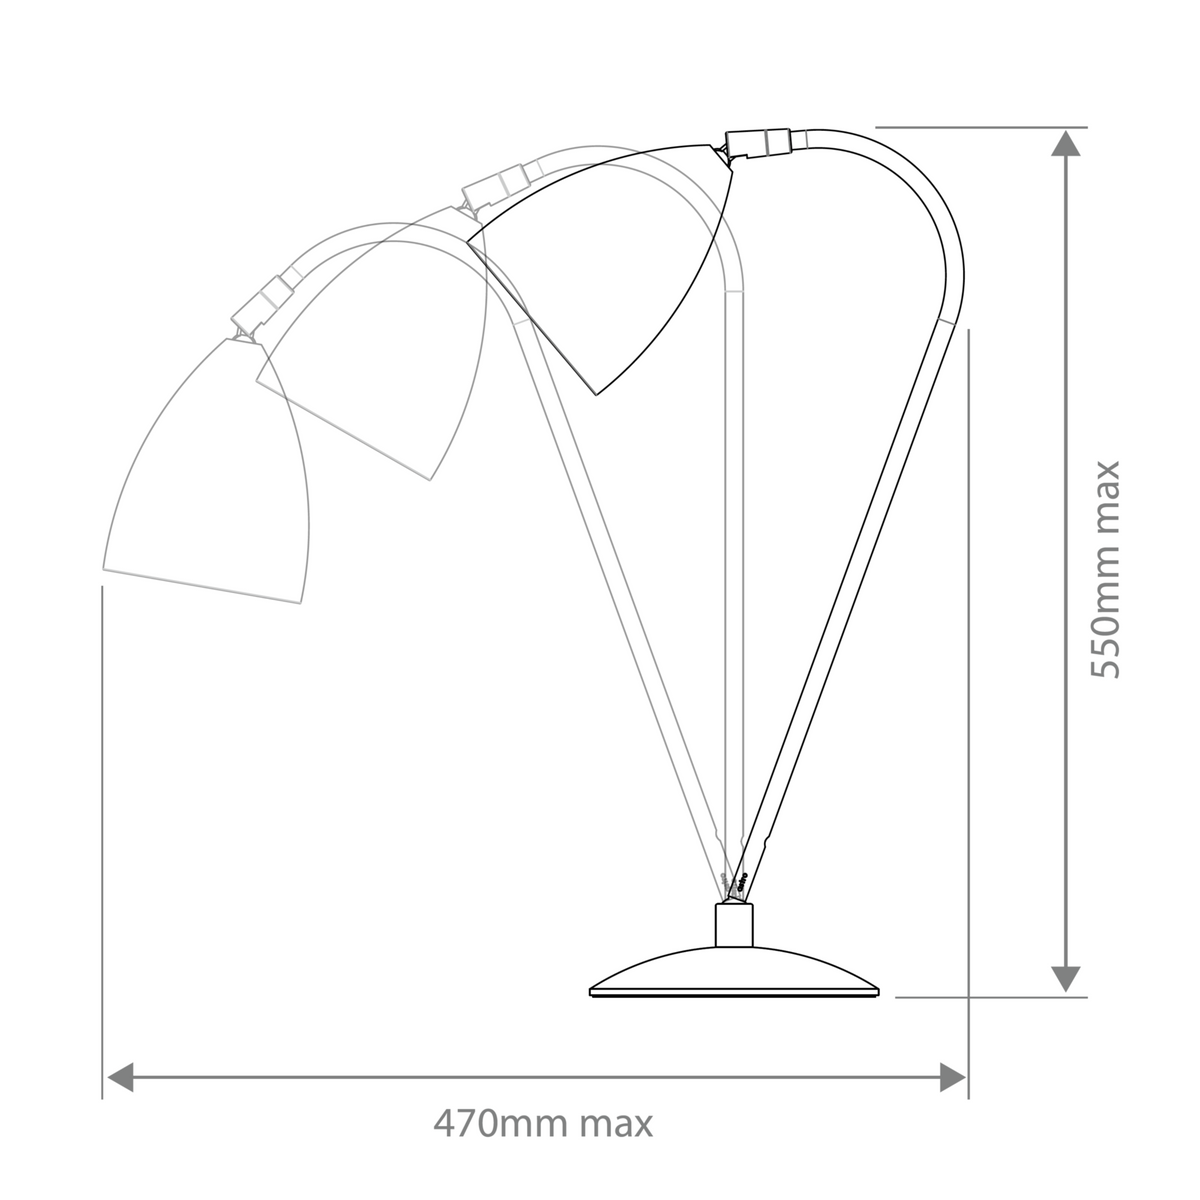 Dimensions for Astro Lighting Office Joel Table Lamp